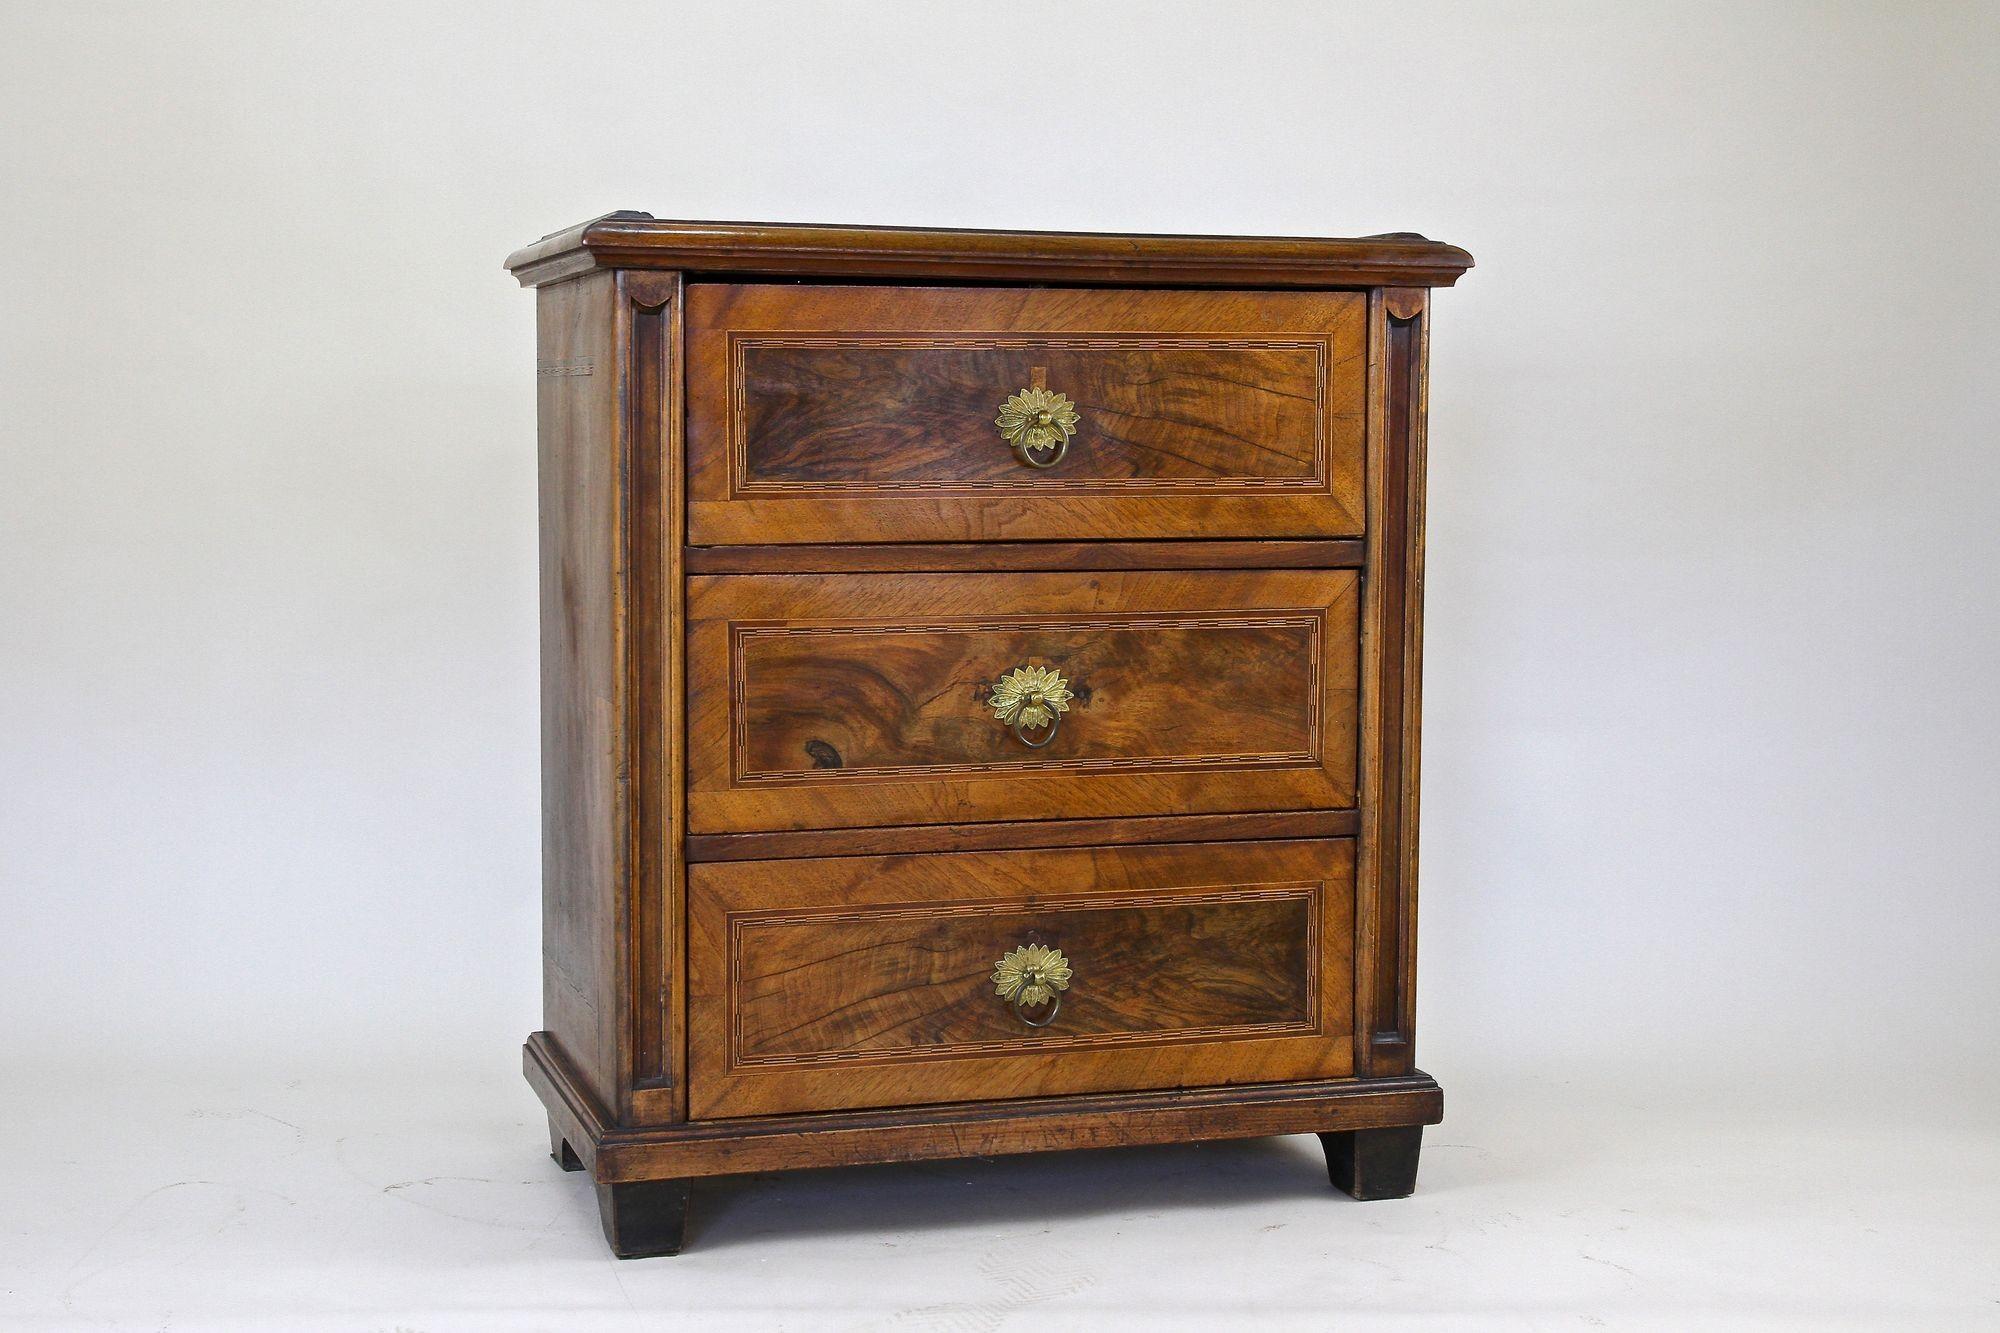 19th Century Biedermeier Nutwood Chest Of Drawers With Micro-Inlays, AT ca. 1850 For Sale 7